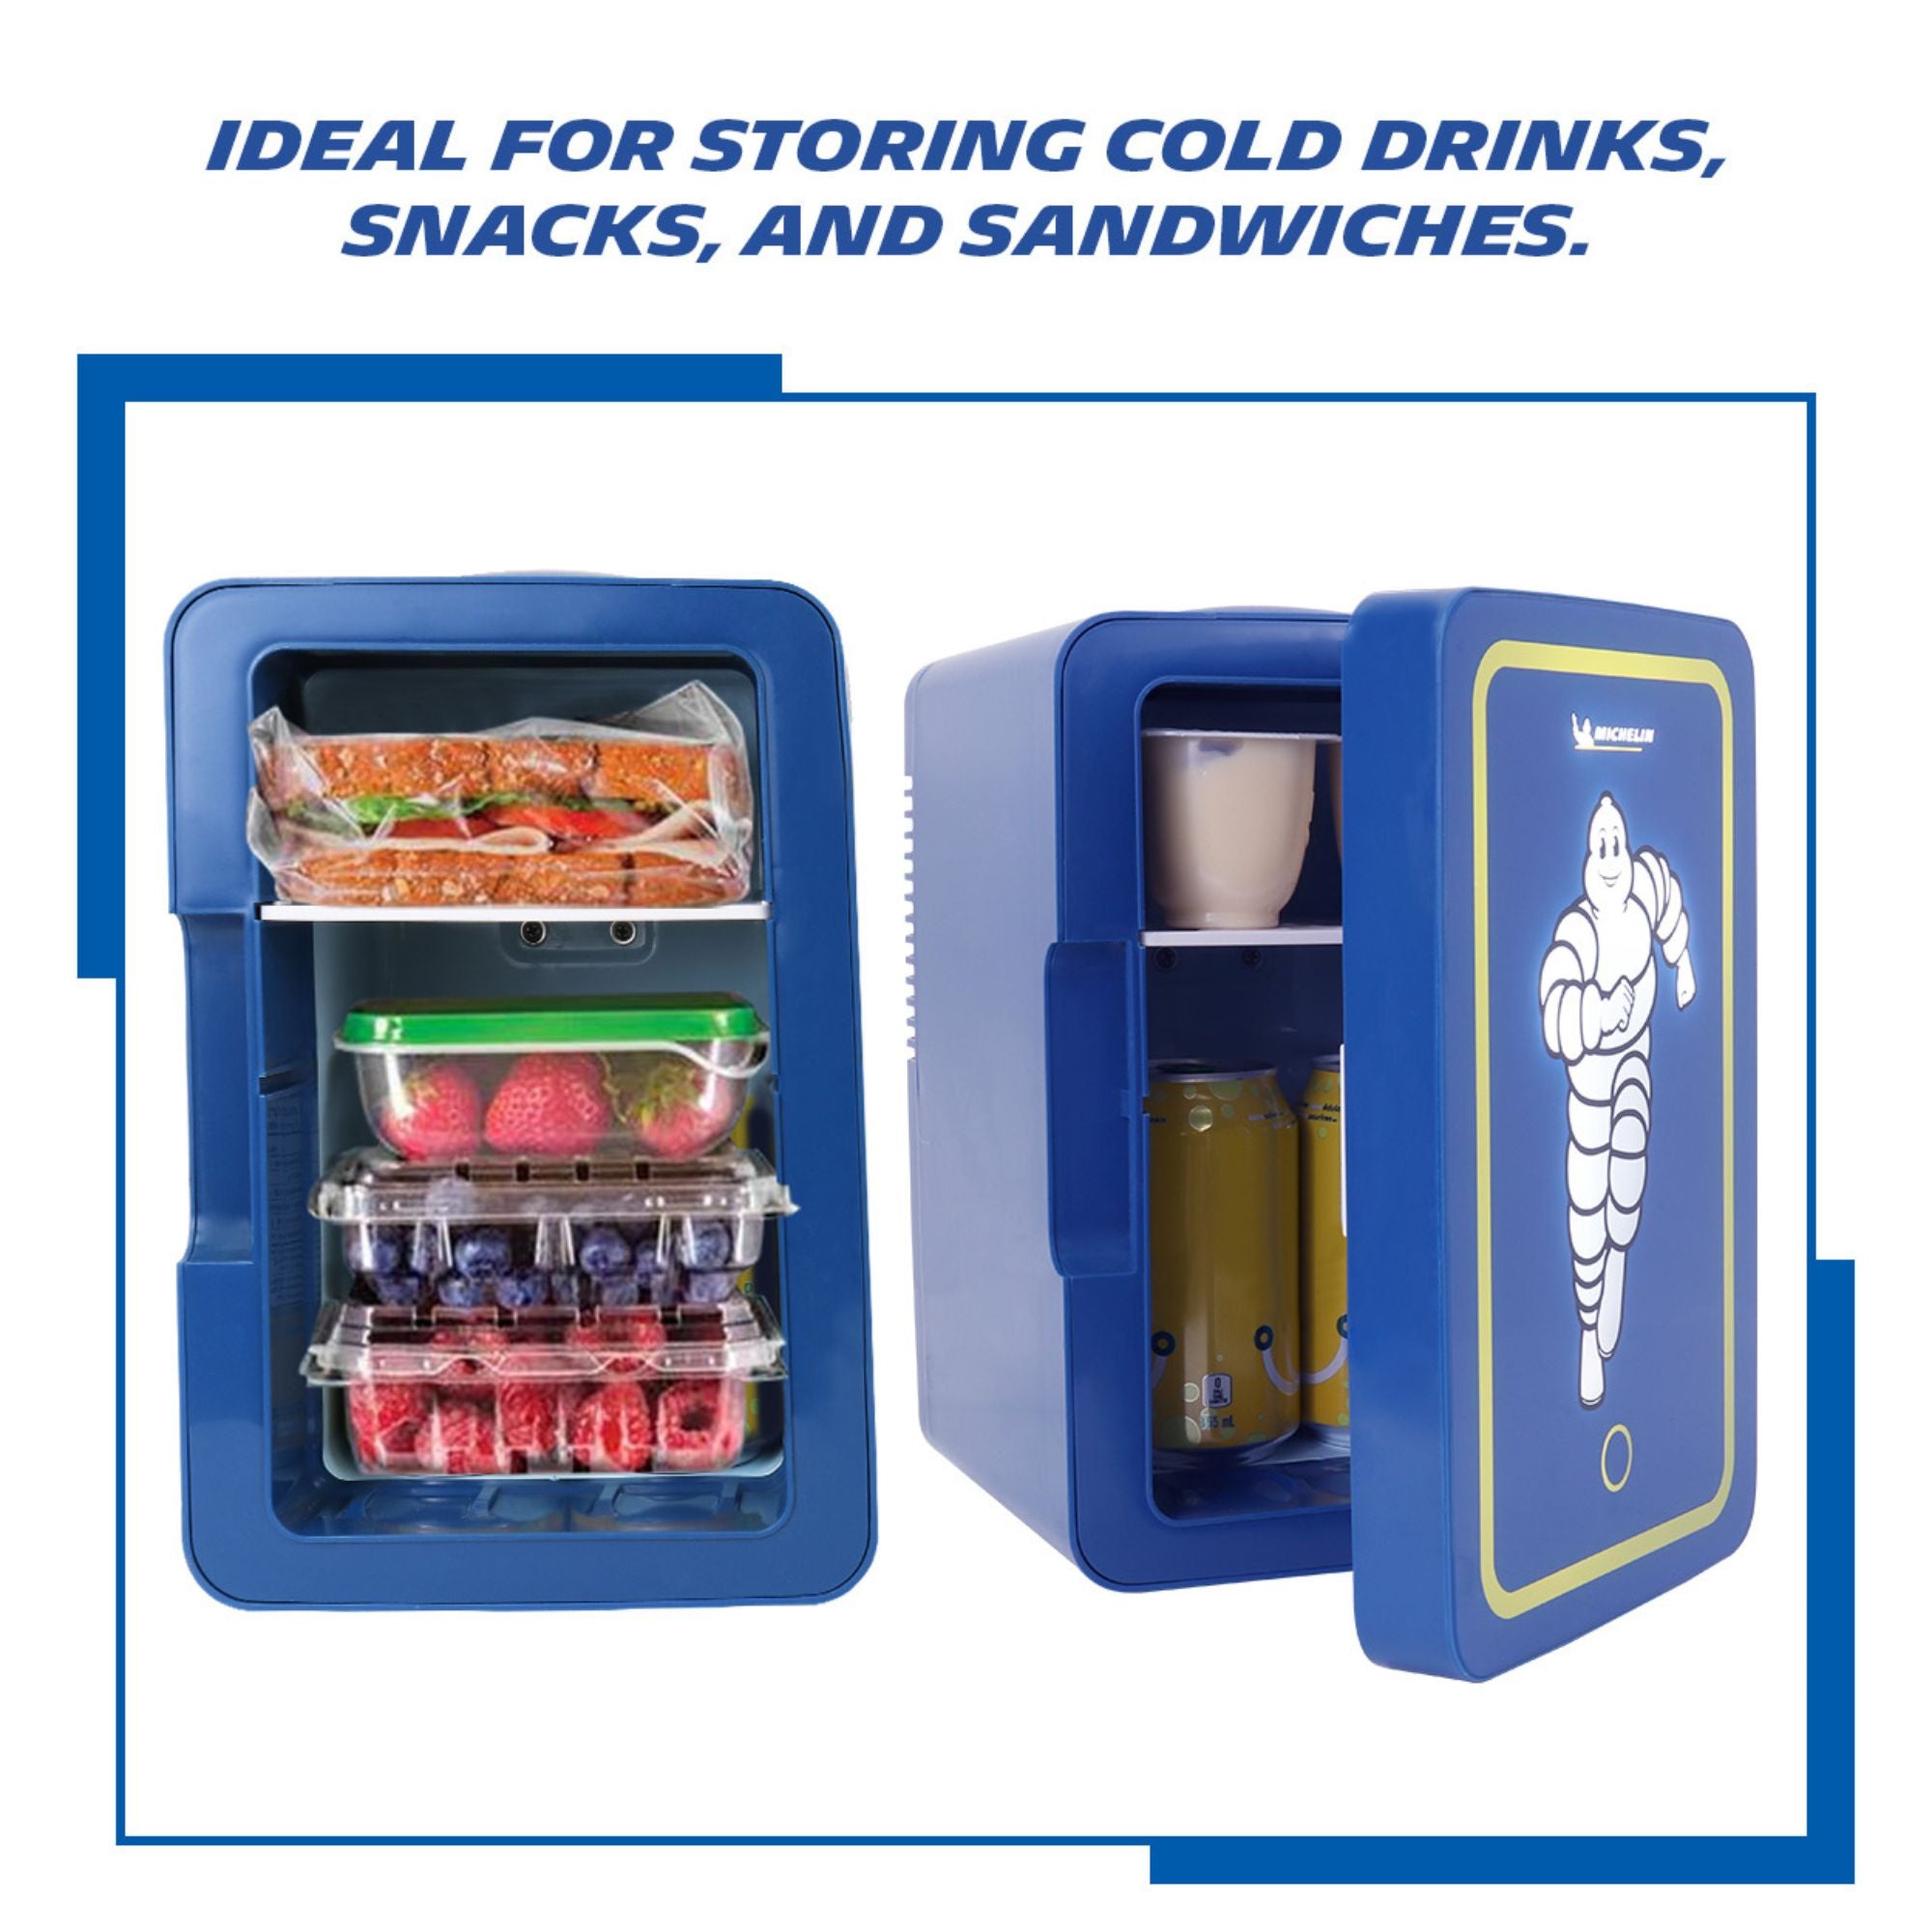 Picture of the interior of the Michelin mini fridge with 3 packages of berries and one sandwich inside on the right and picture of the mini-fridge partly open with cans of pop and a yogurt cup visible on the right. Text above reads "Ideal for storing cold drinks, snacks, and sandwiches"